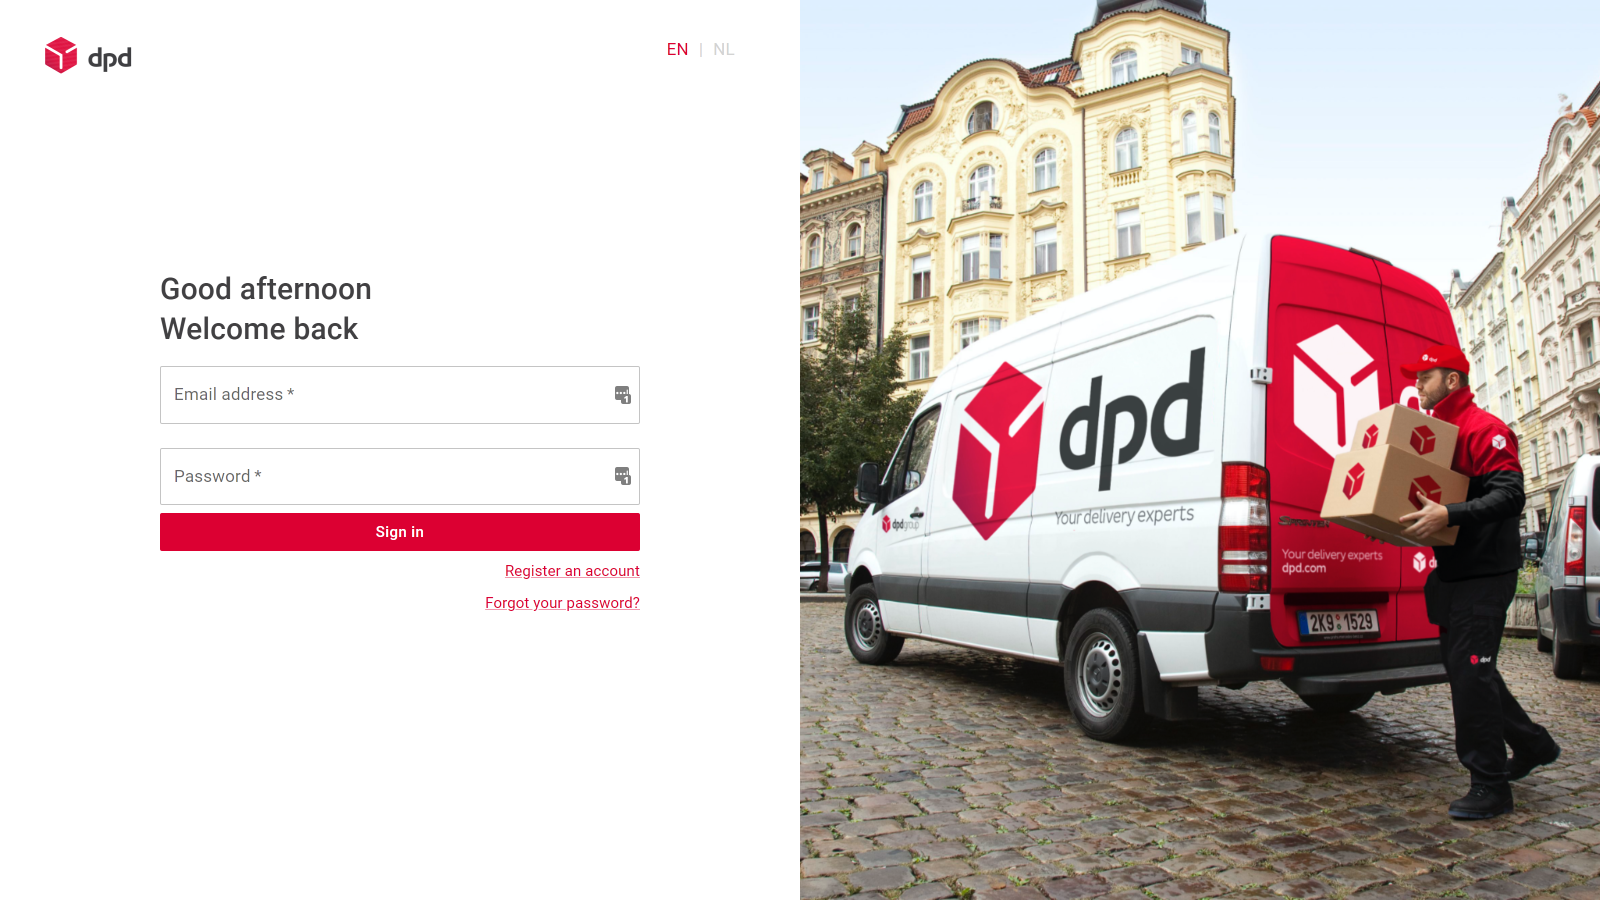 Login to easily manage your DPD shipments.